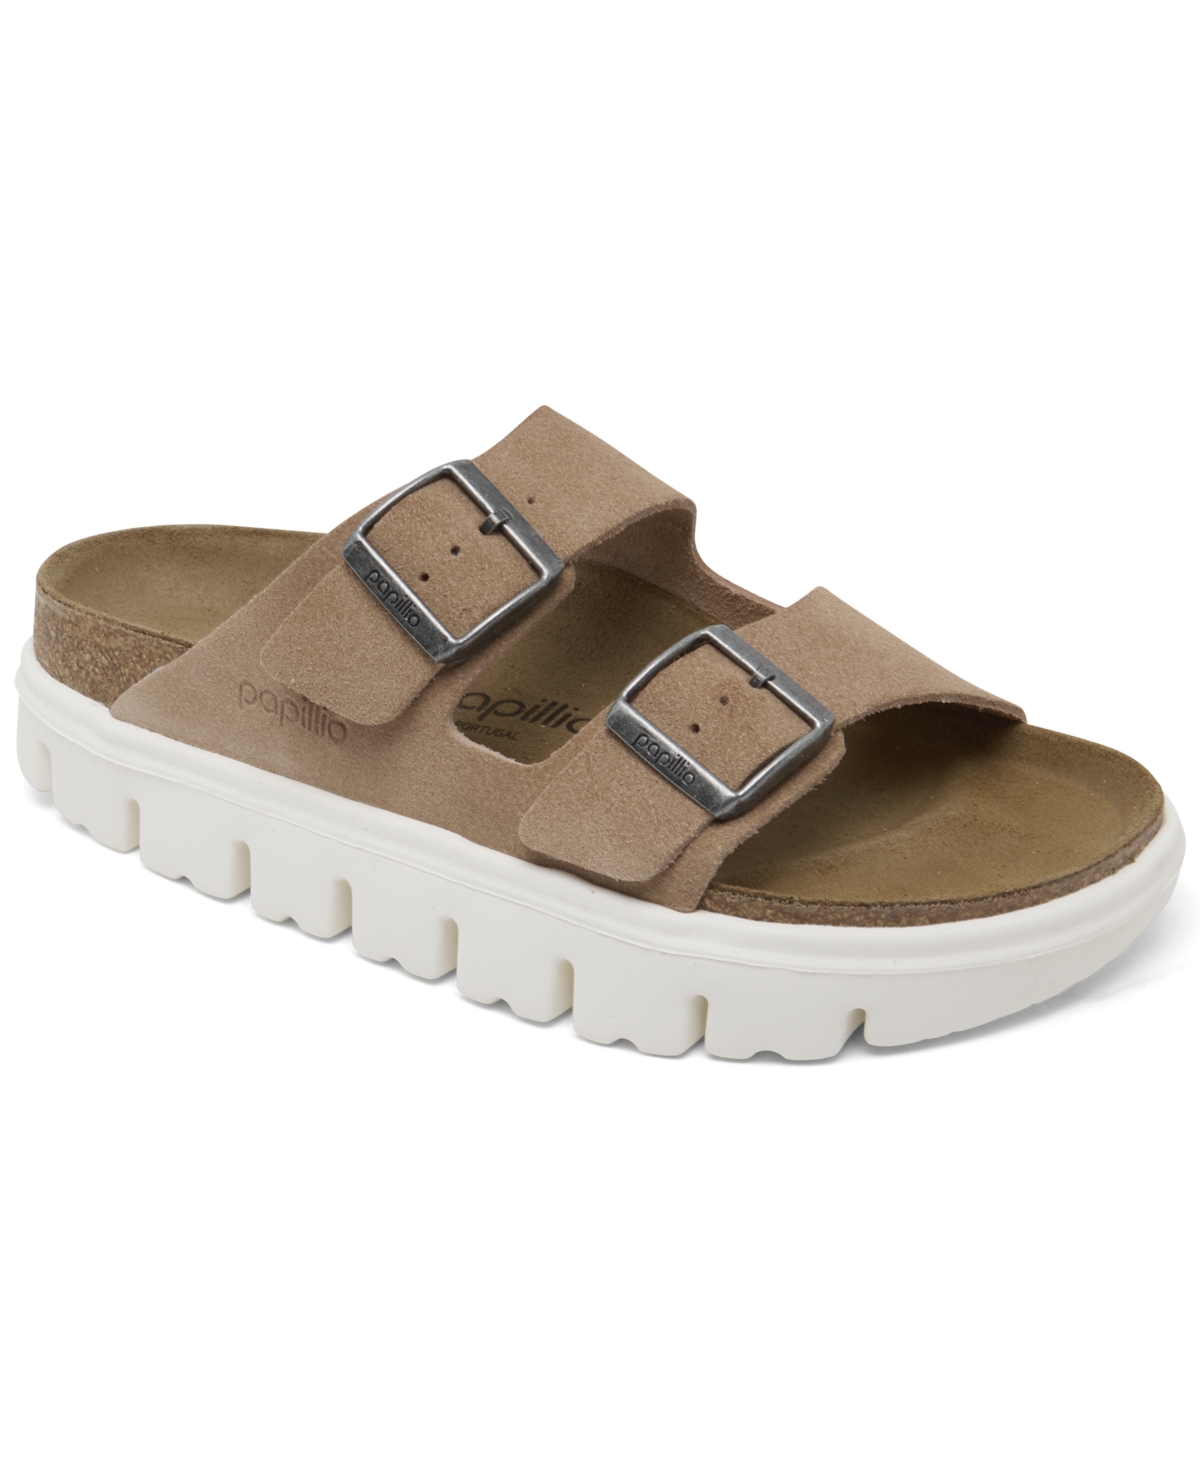 Shop Birkenstock Papillio By  Women's Arizona Chunky Suede Leather Platform Sandals From Finish Line In Warm Sand